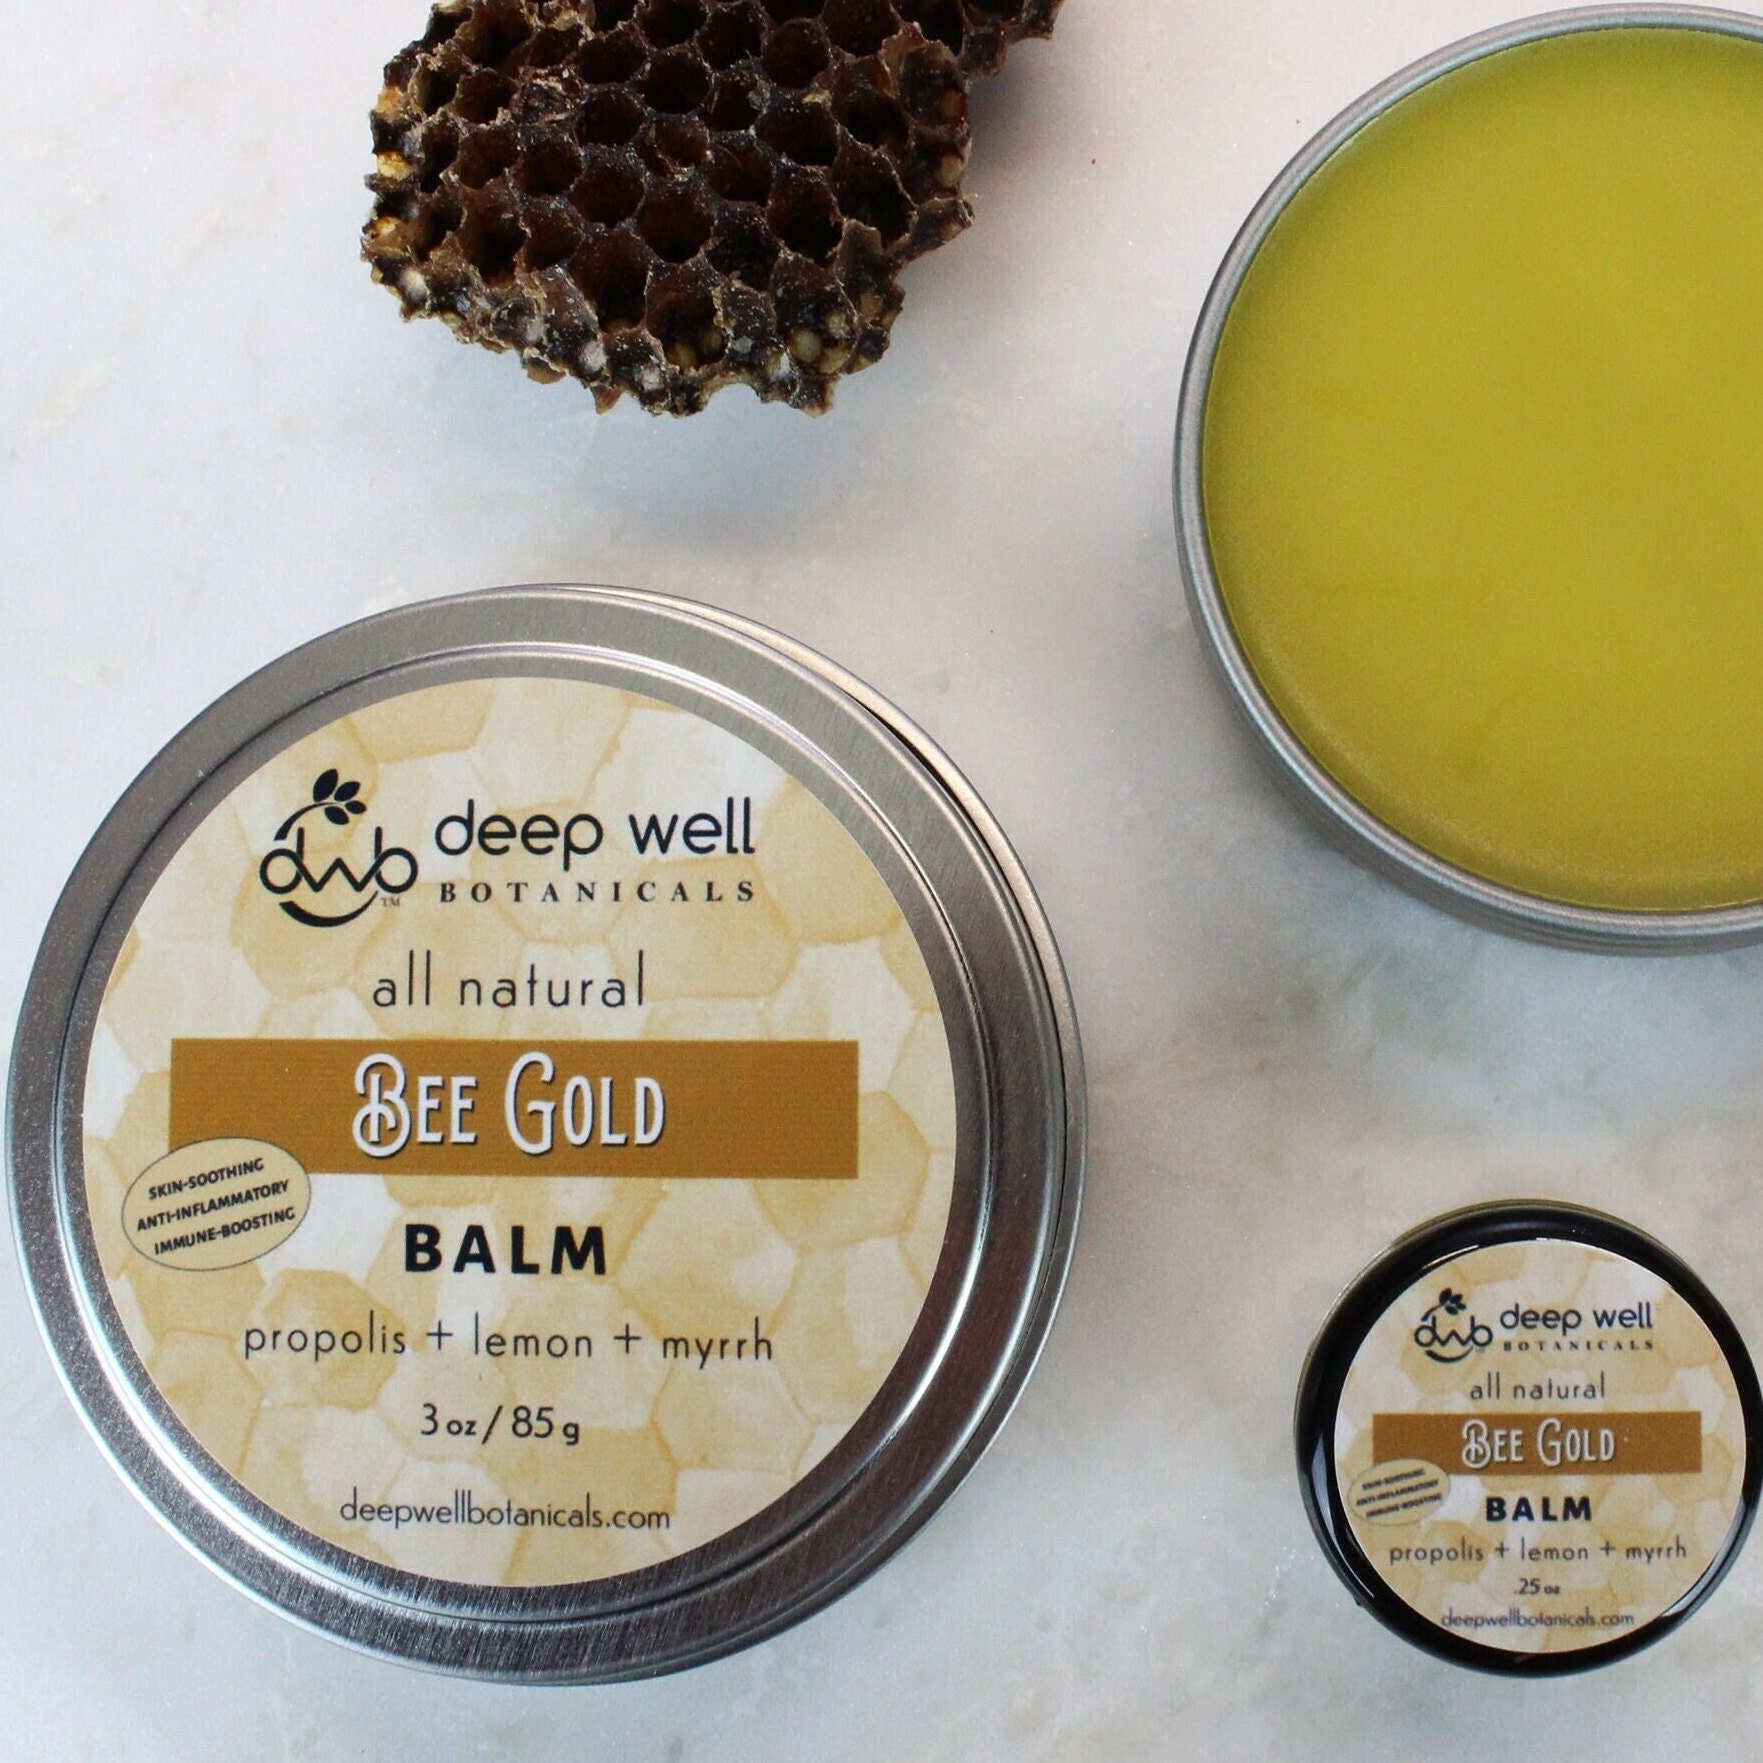 Wise Men Healing Balm for Soothing Relief with Myrrh and